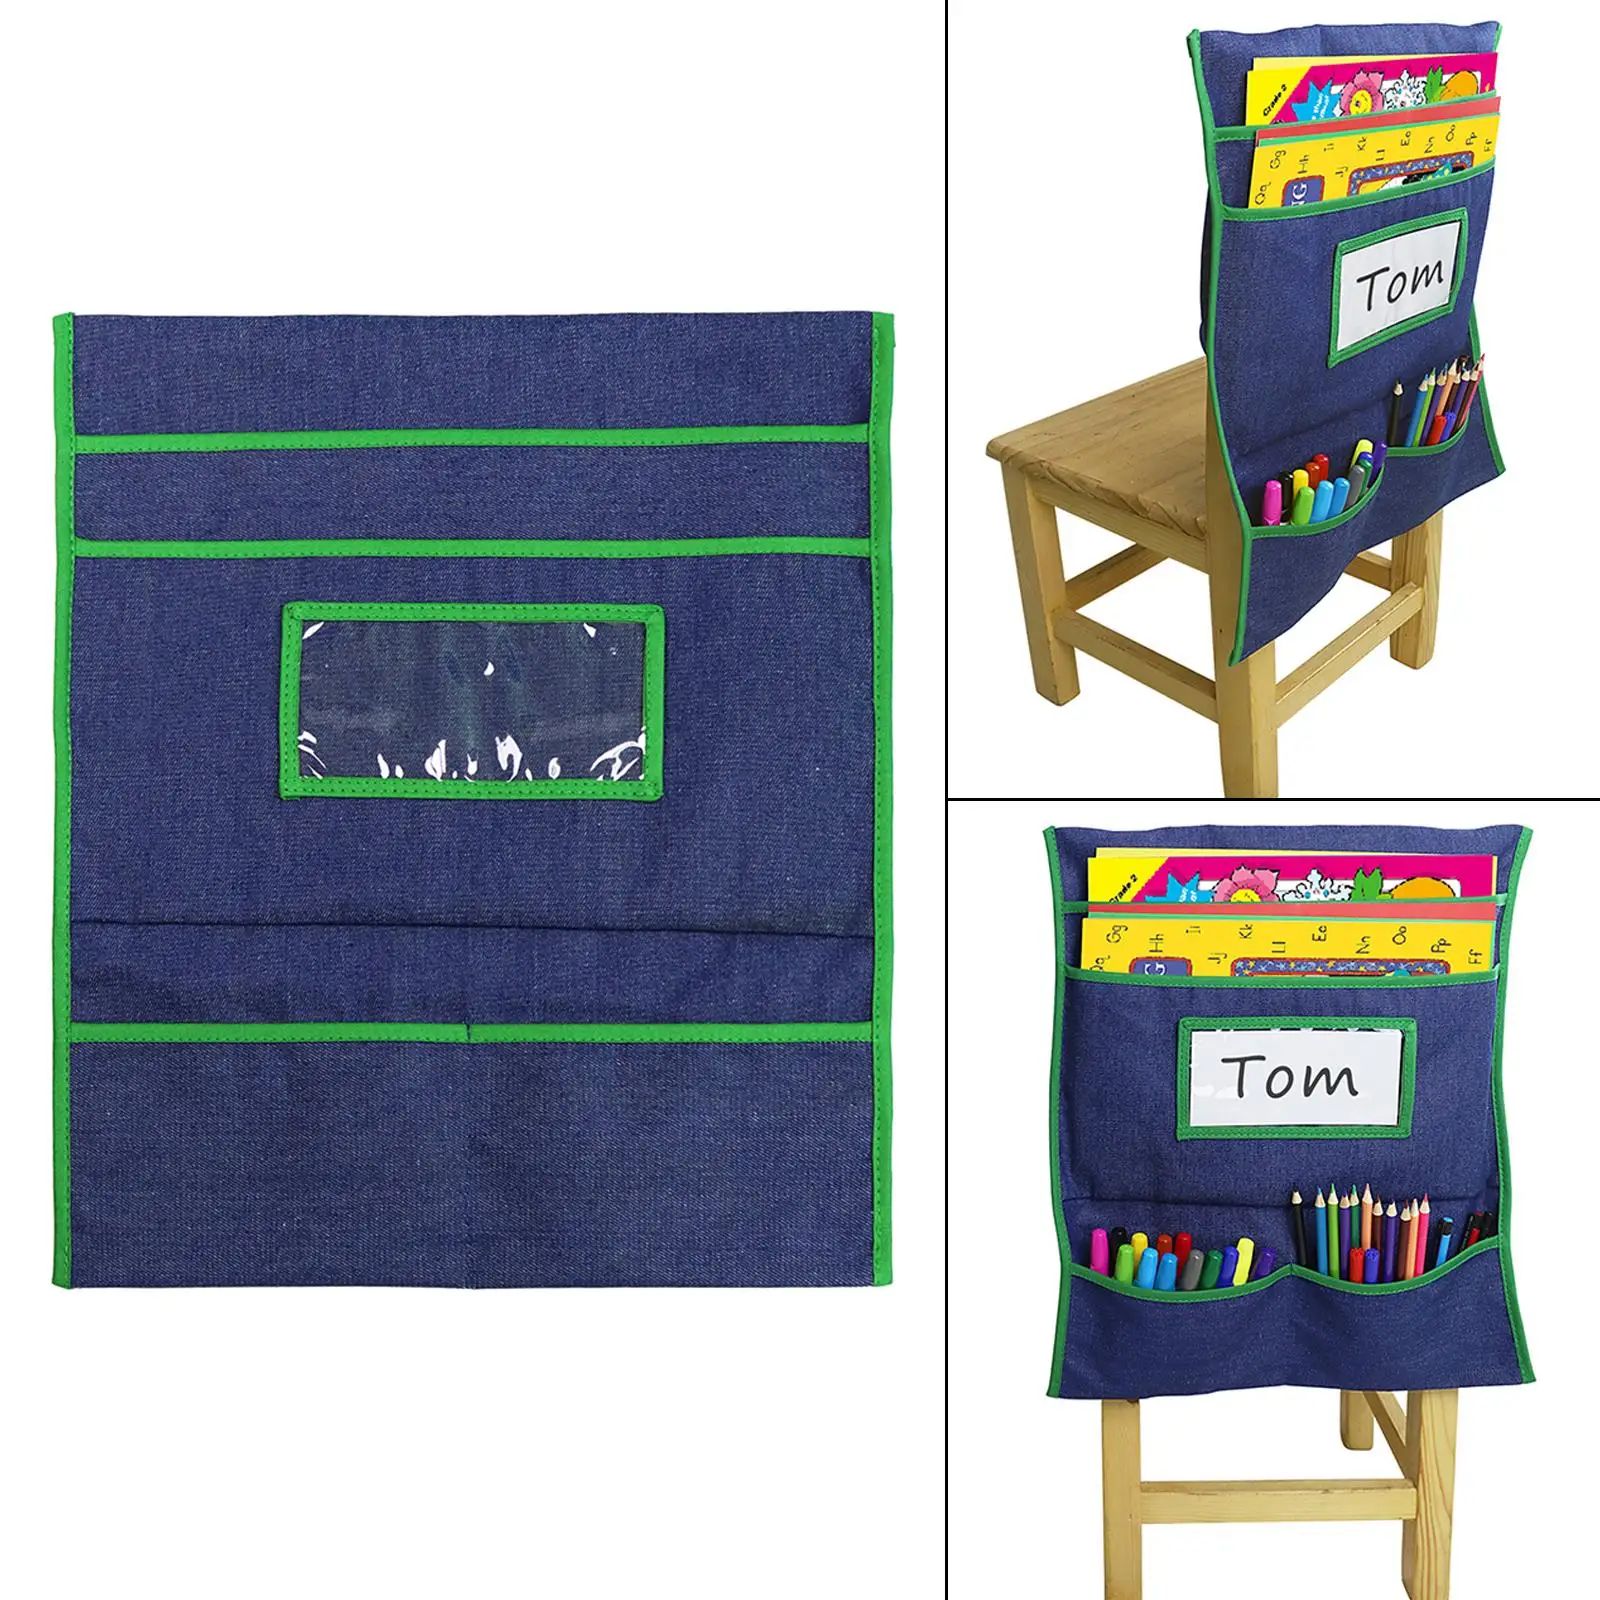 Chair Organizer Sturdy with Name Tag Slot Heavy Duty Perfect Fit Thoughtful Durable Chair chair Back Pocket for Storage Daycare